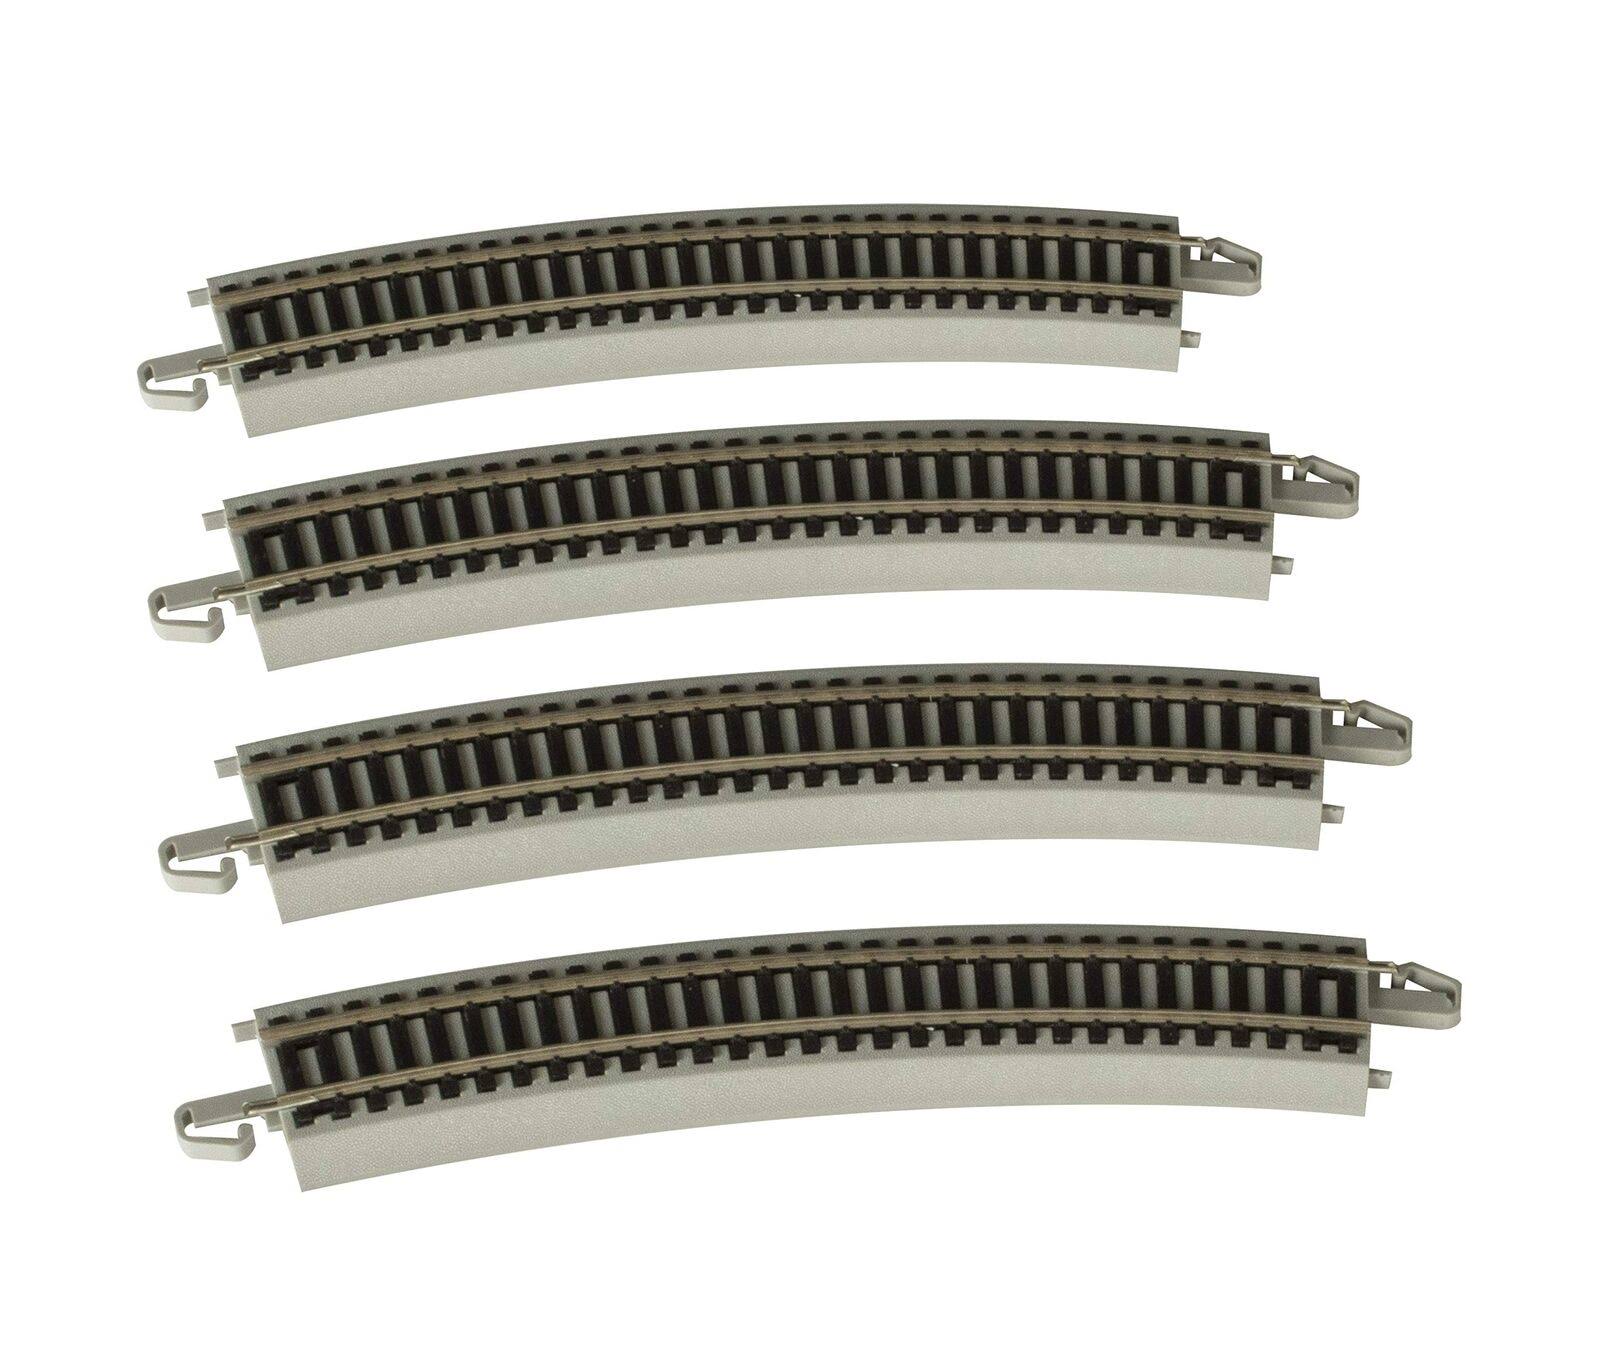 Bachmann Trains Snap-Fit E-Z Track in 22in Radius Curved Track - 4pcs